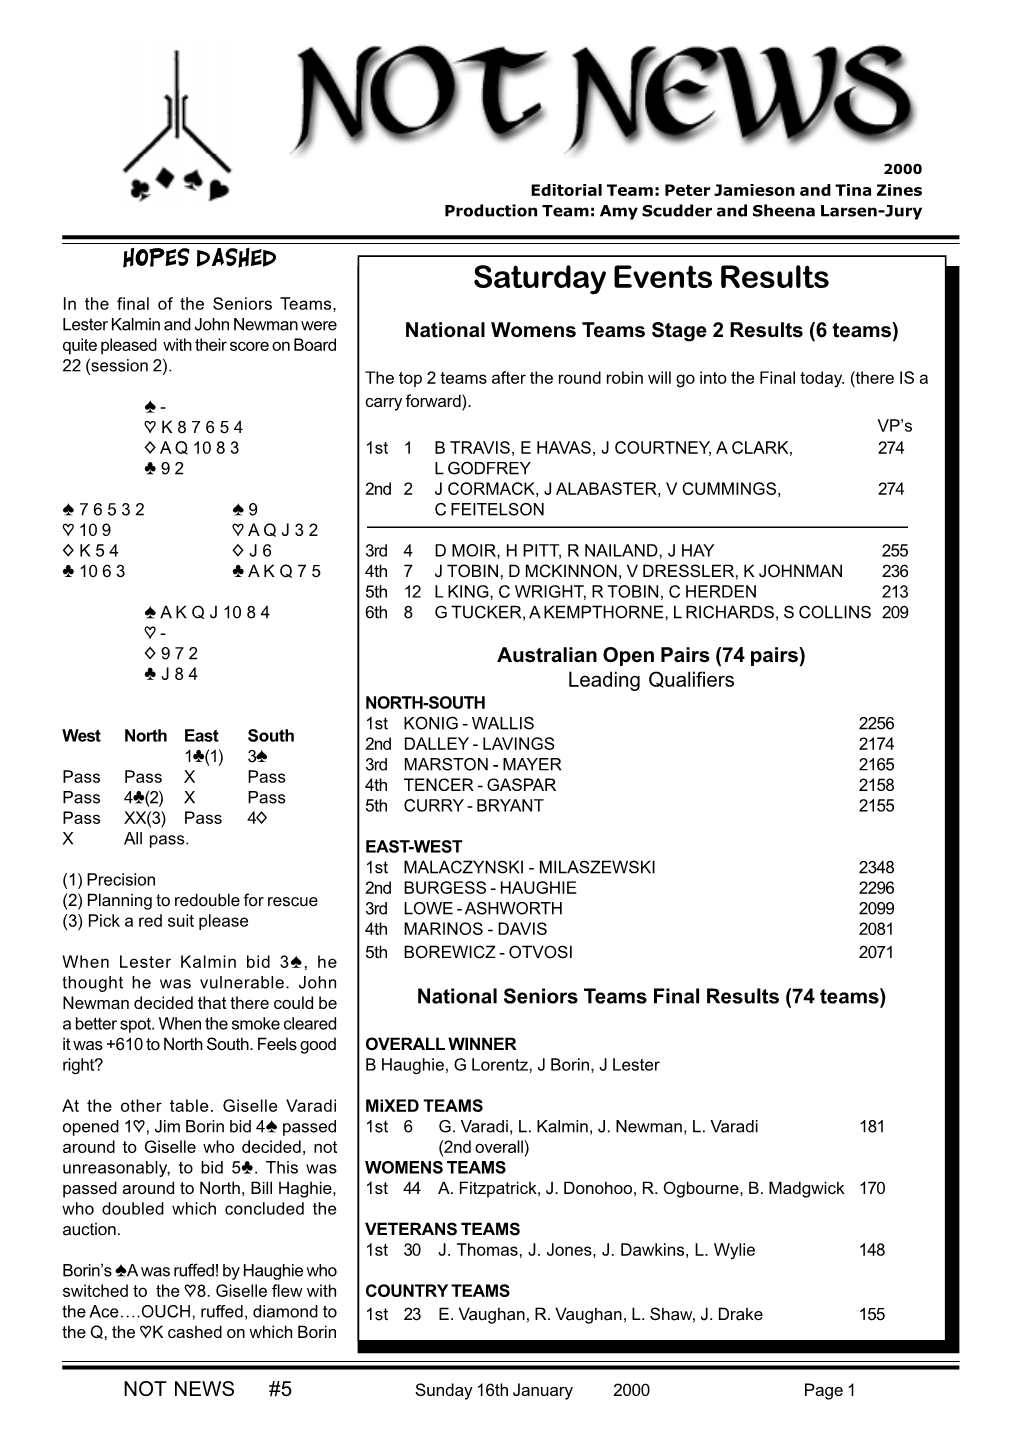 Saturday Events Results